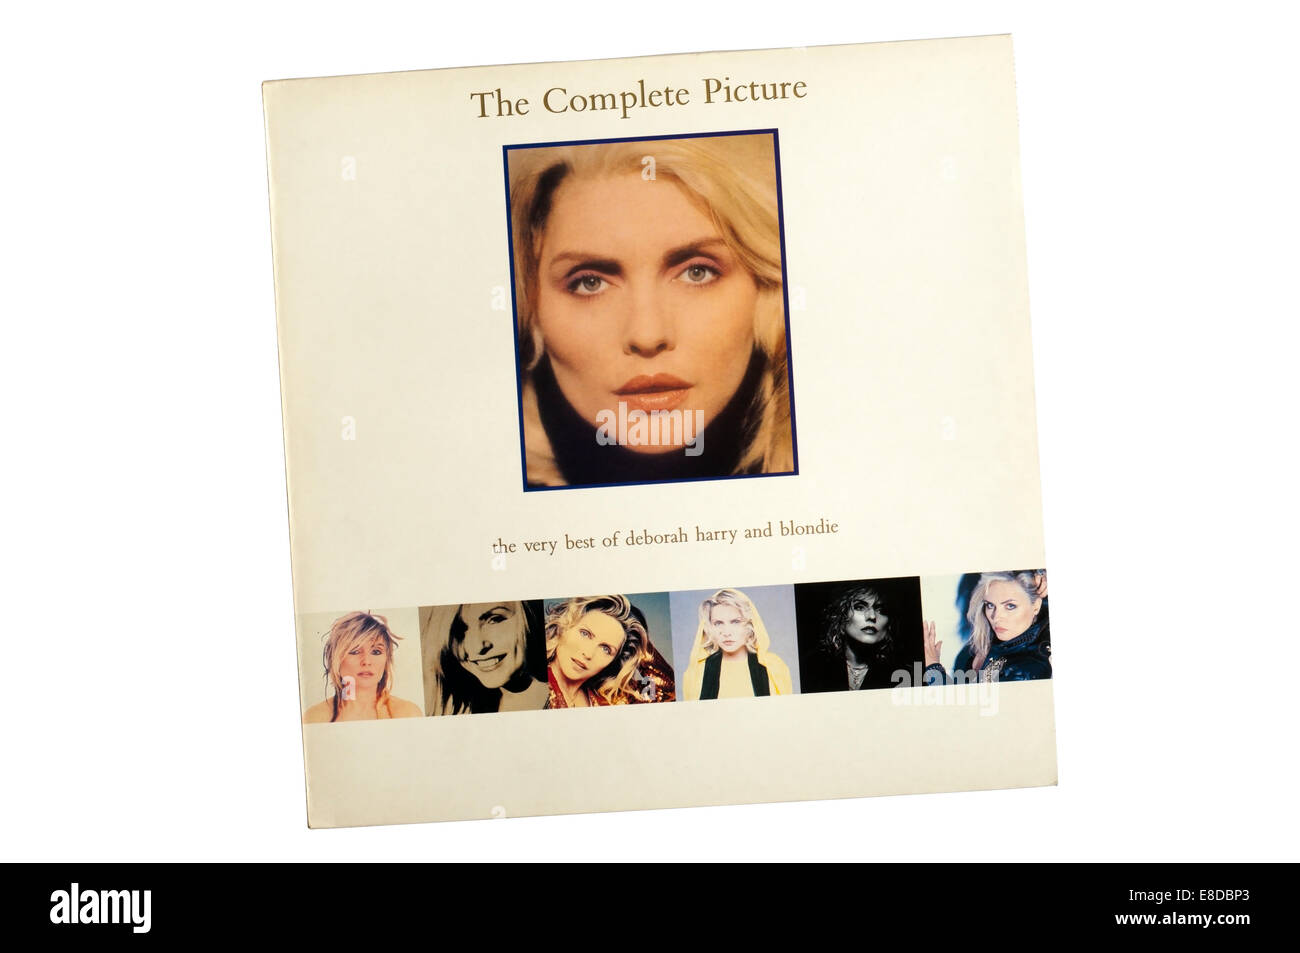 The Complete Picture: The Very Best of Deborah Harry and Blondie was a compilation album released on Chrysalis Records in 1991. Stock Photo